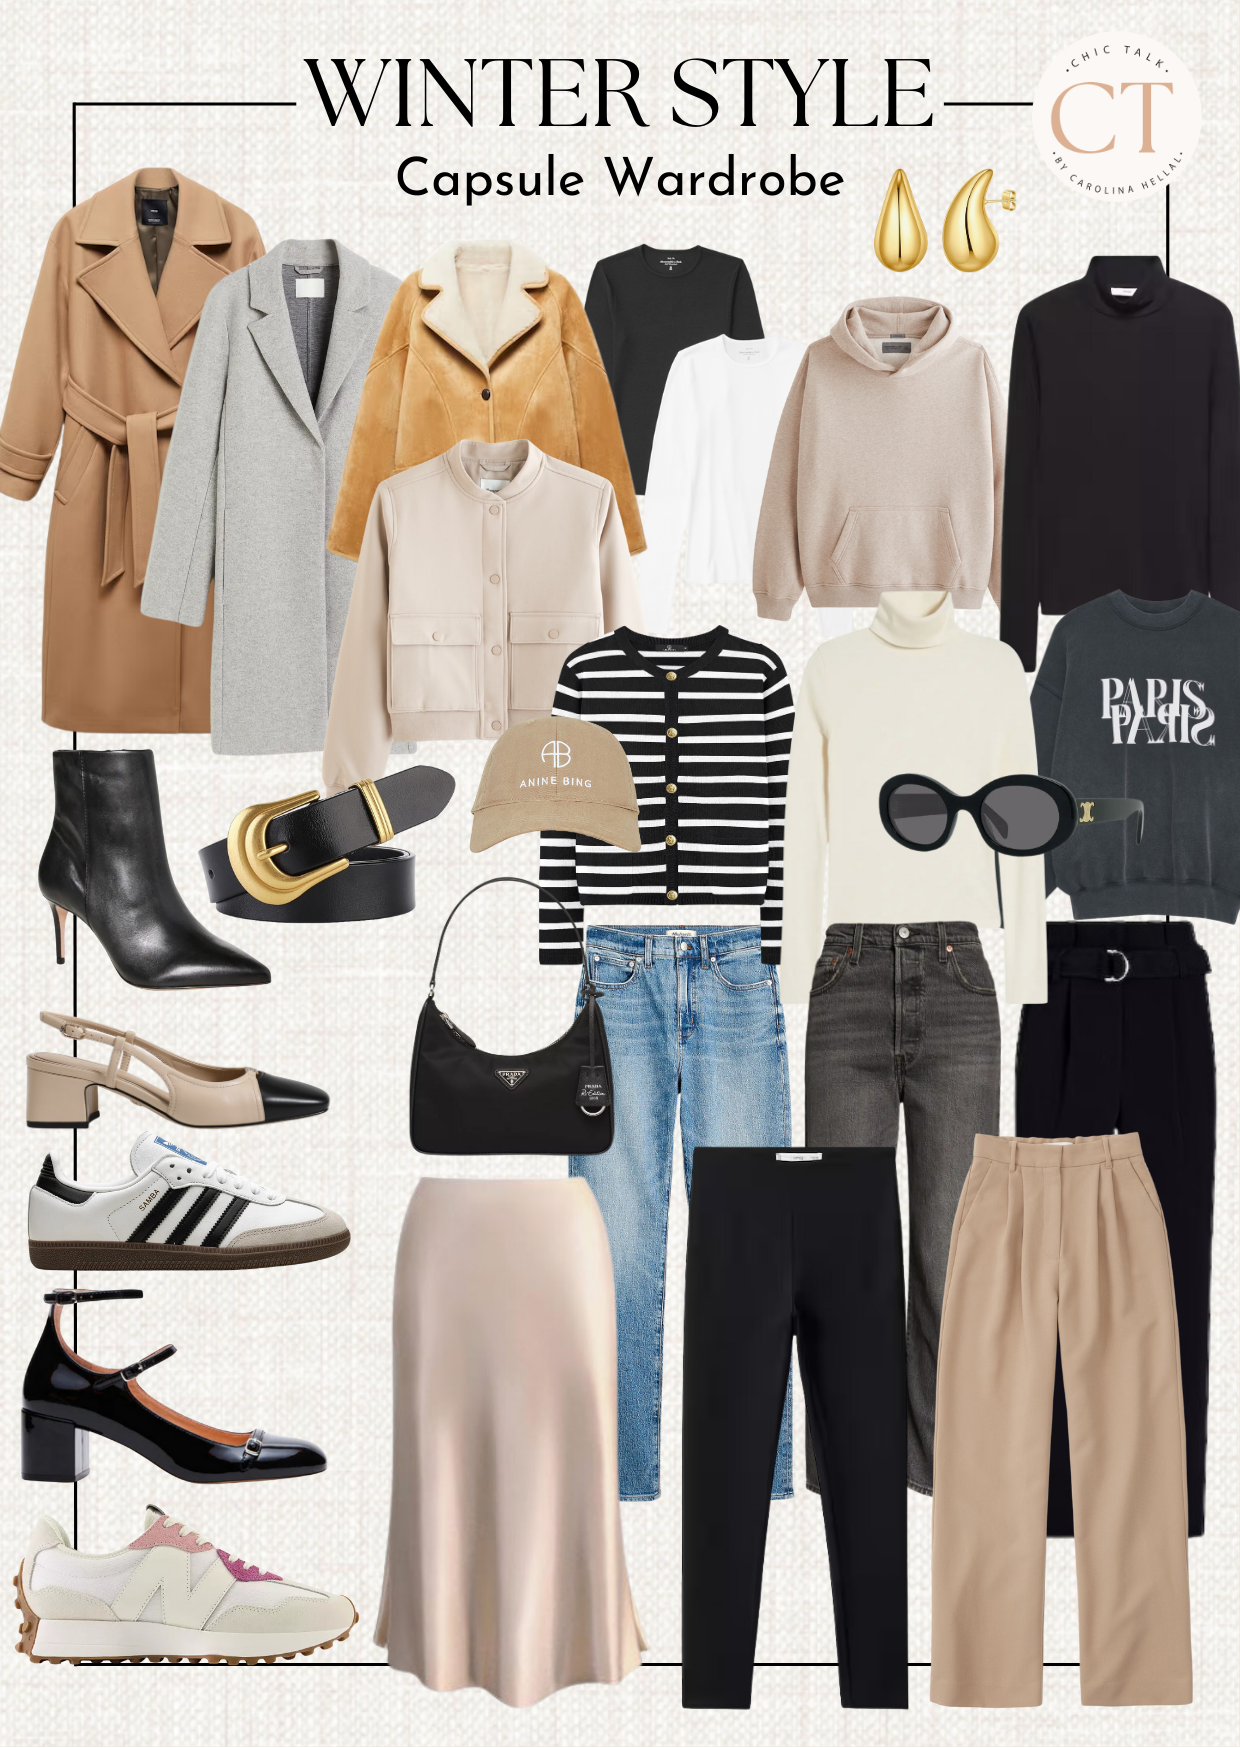 Winter style guide - CHIC TALK